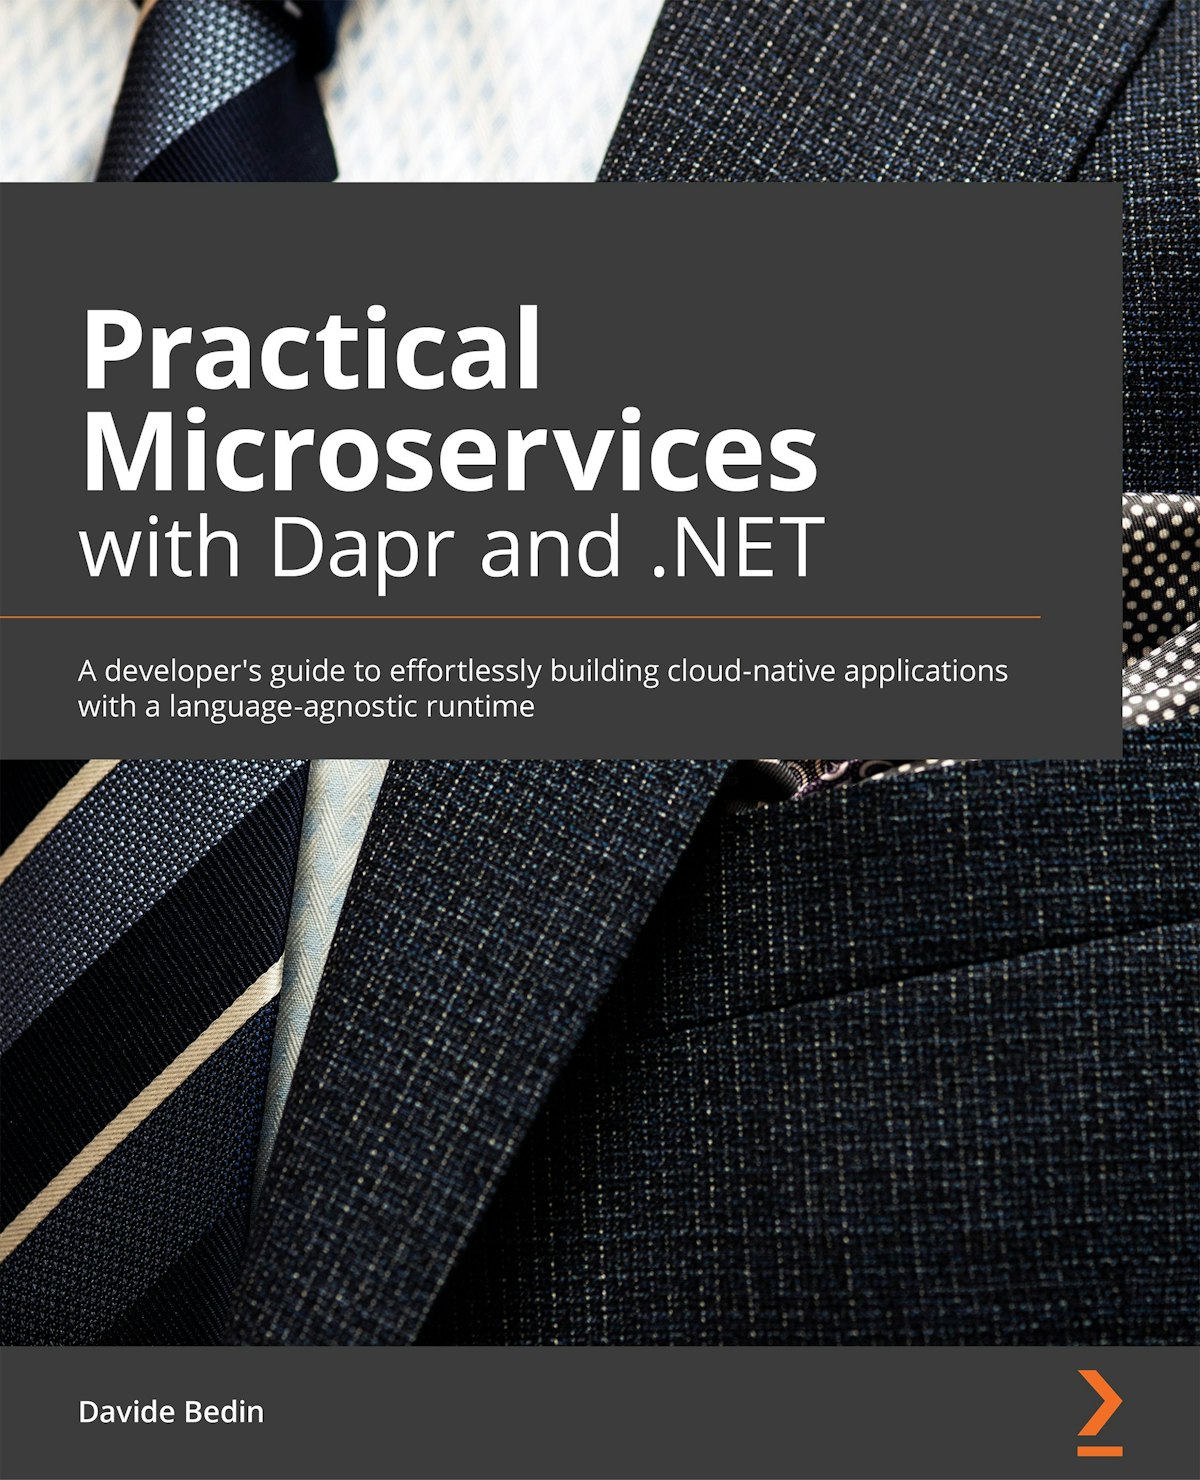 featured image - Microsoft's DAPR (Distributed Application Runtime): An Overview